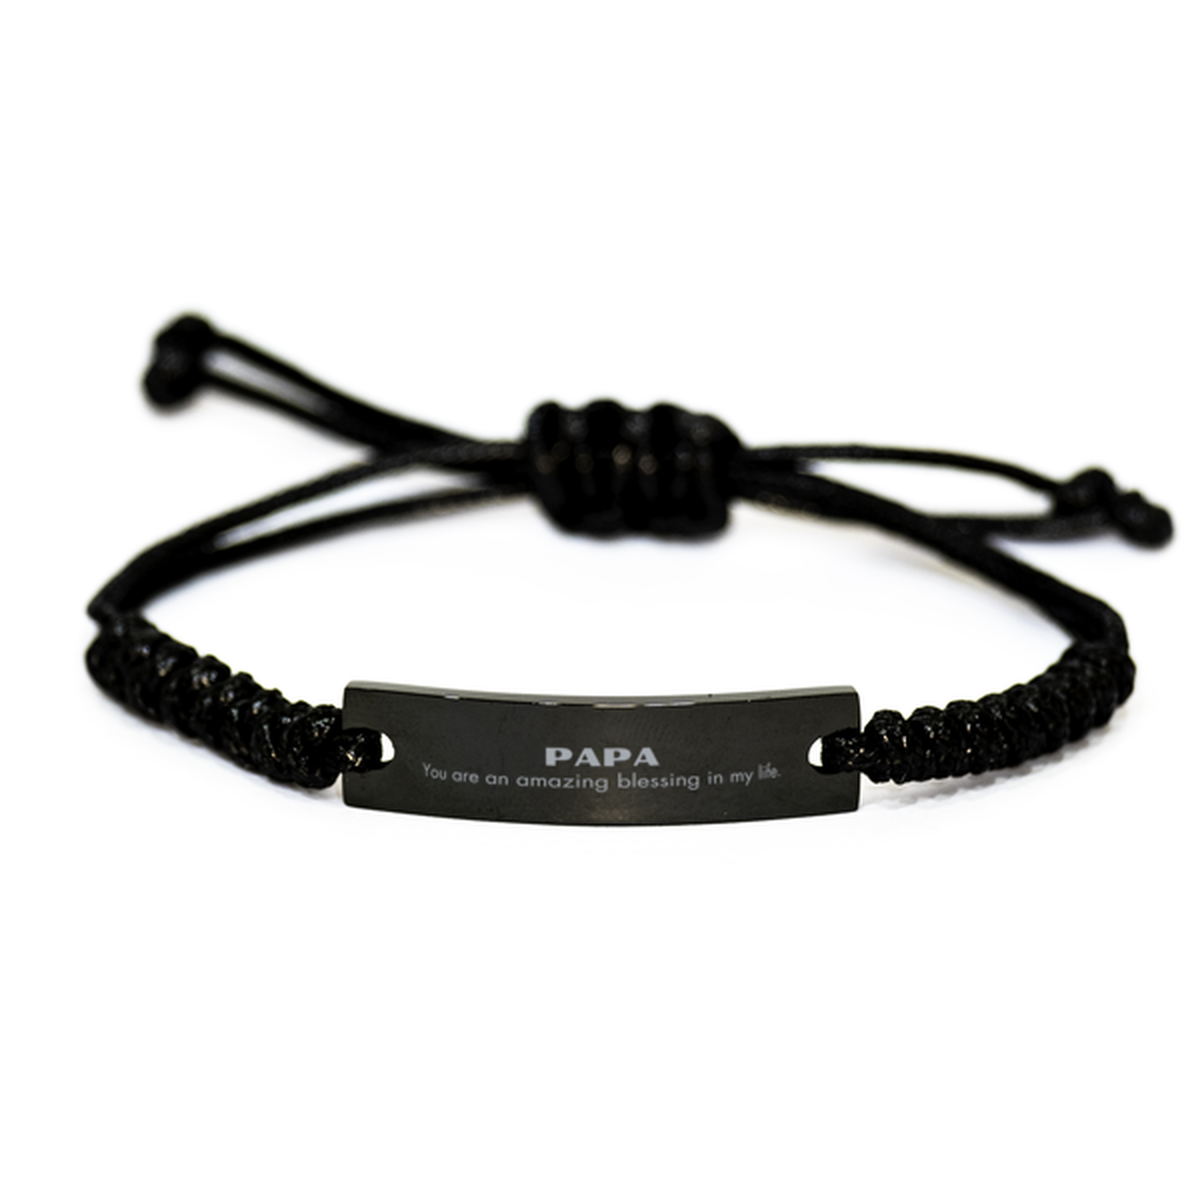 Papa Black Rope Bracelet, You are an amazing blessing in my life, Thank You Gifts For Papa, Inspirational Birthday Christmas Unique Gifts For Papa